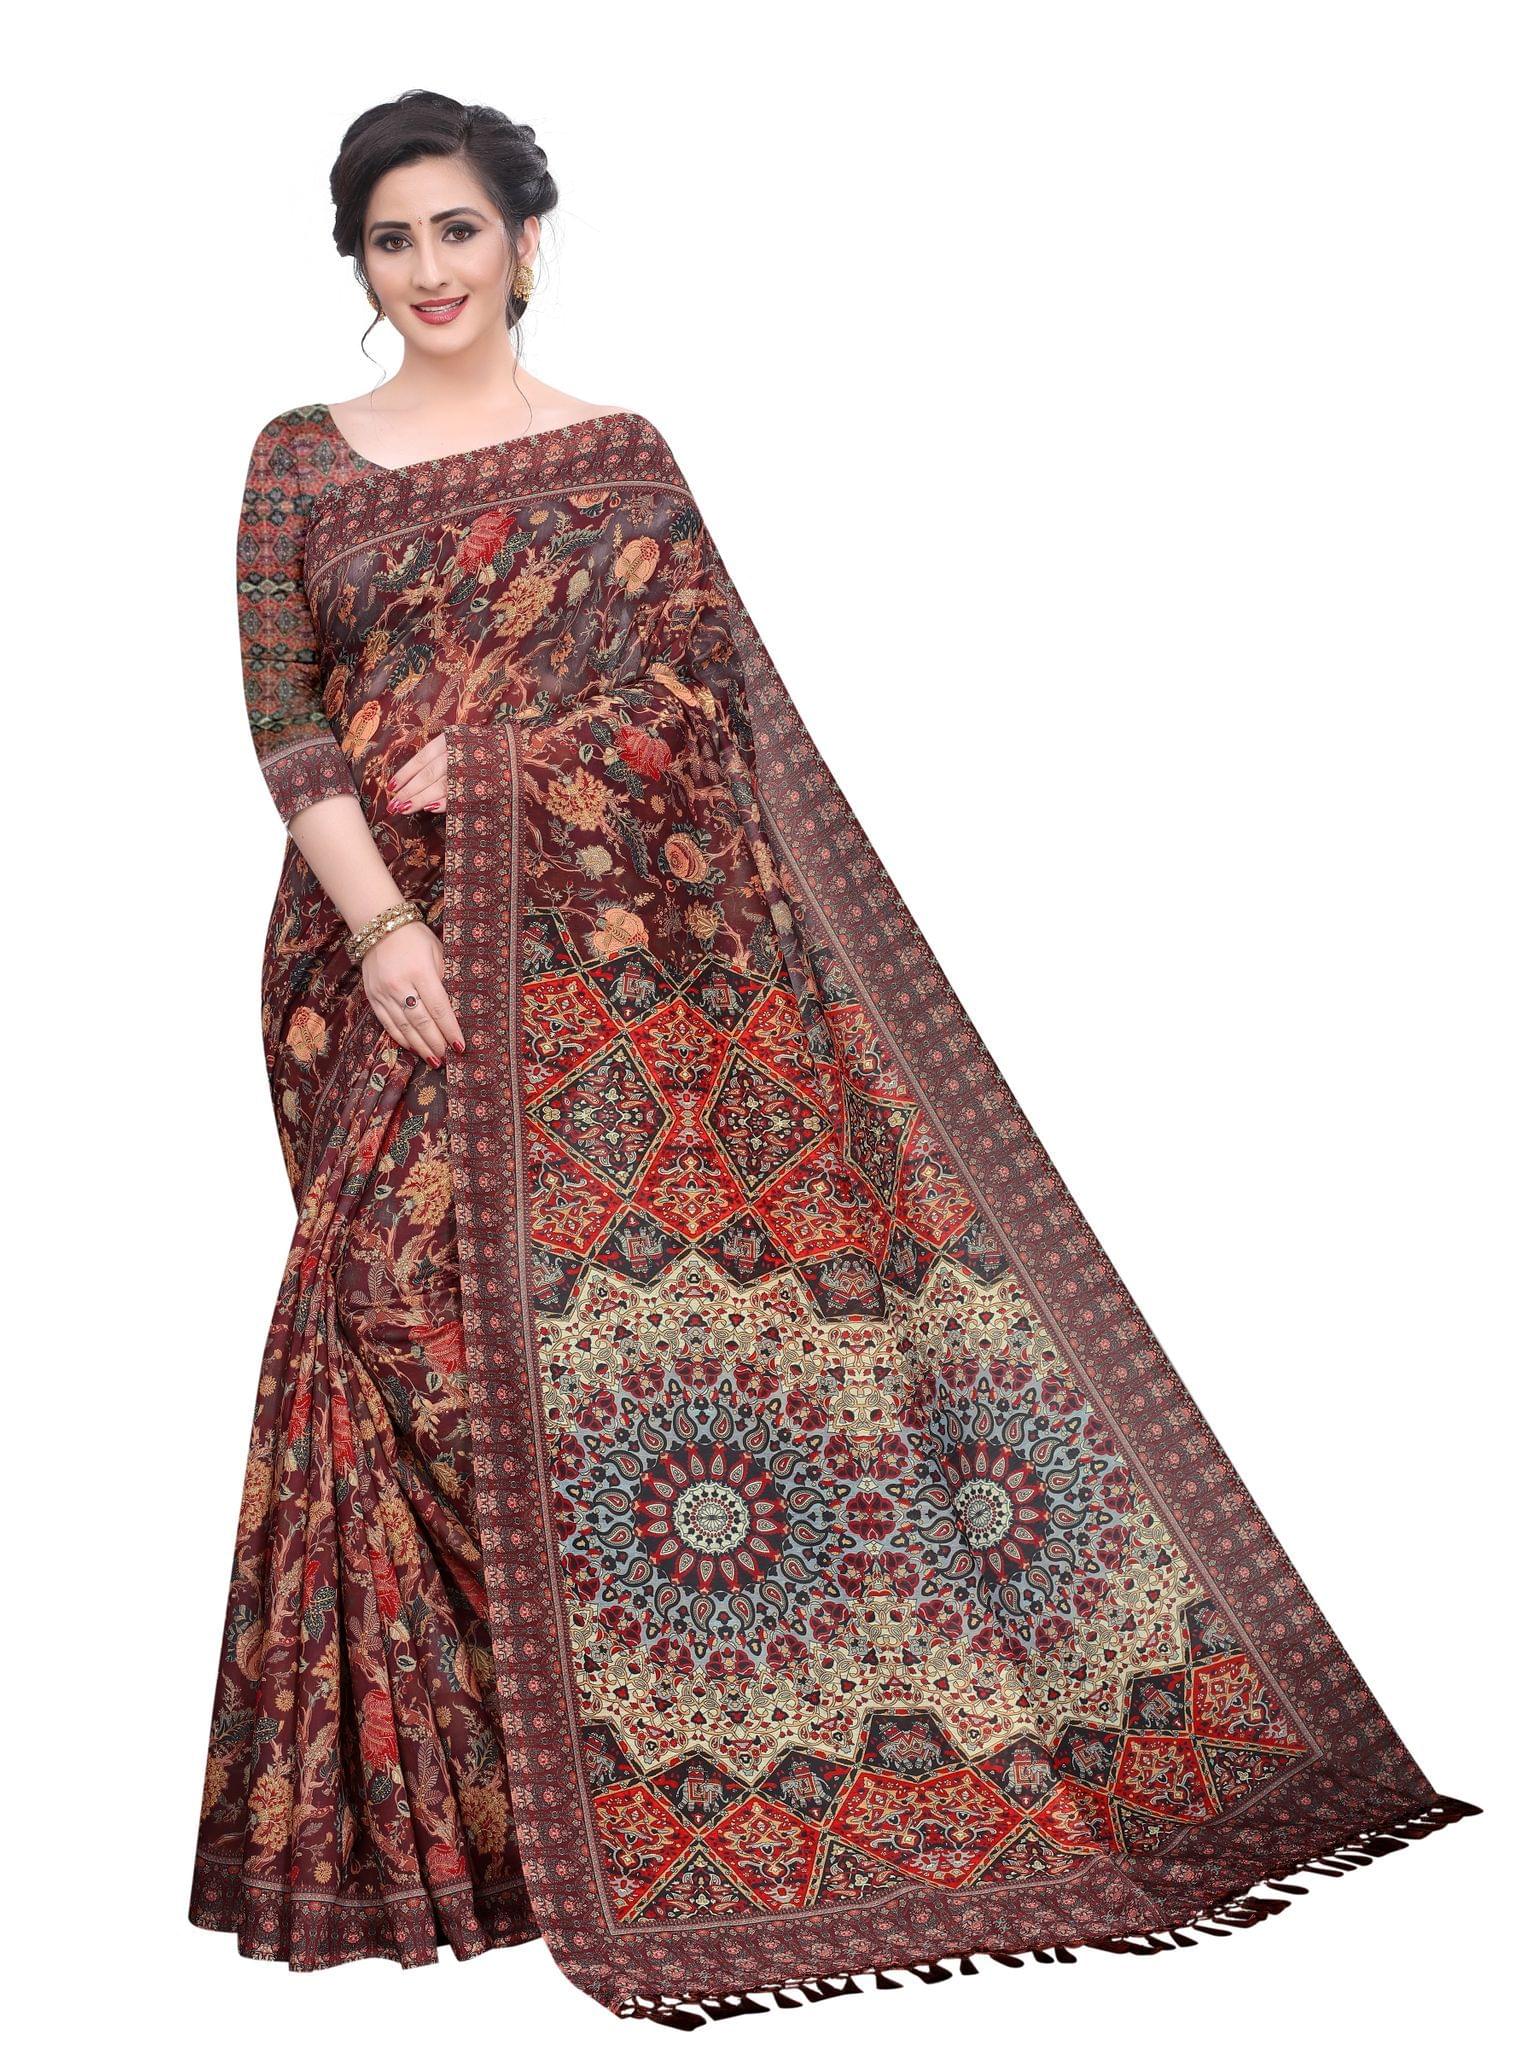 Silk Zone Women's Cotton Digital Printed Brown Saree With Unstitched Blouse Piece